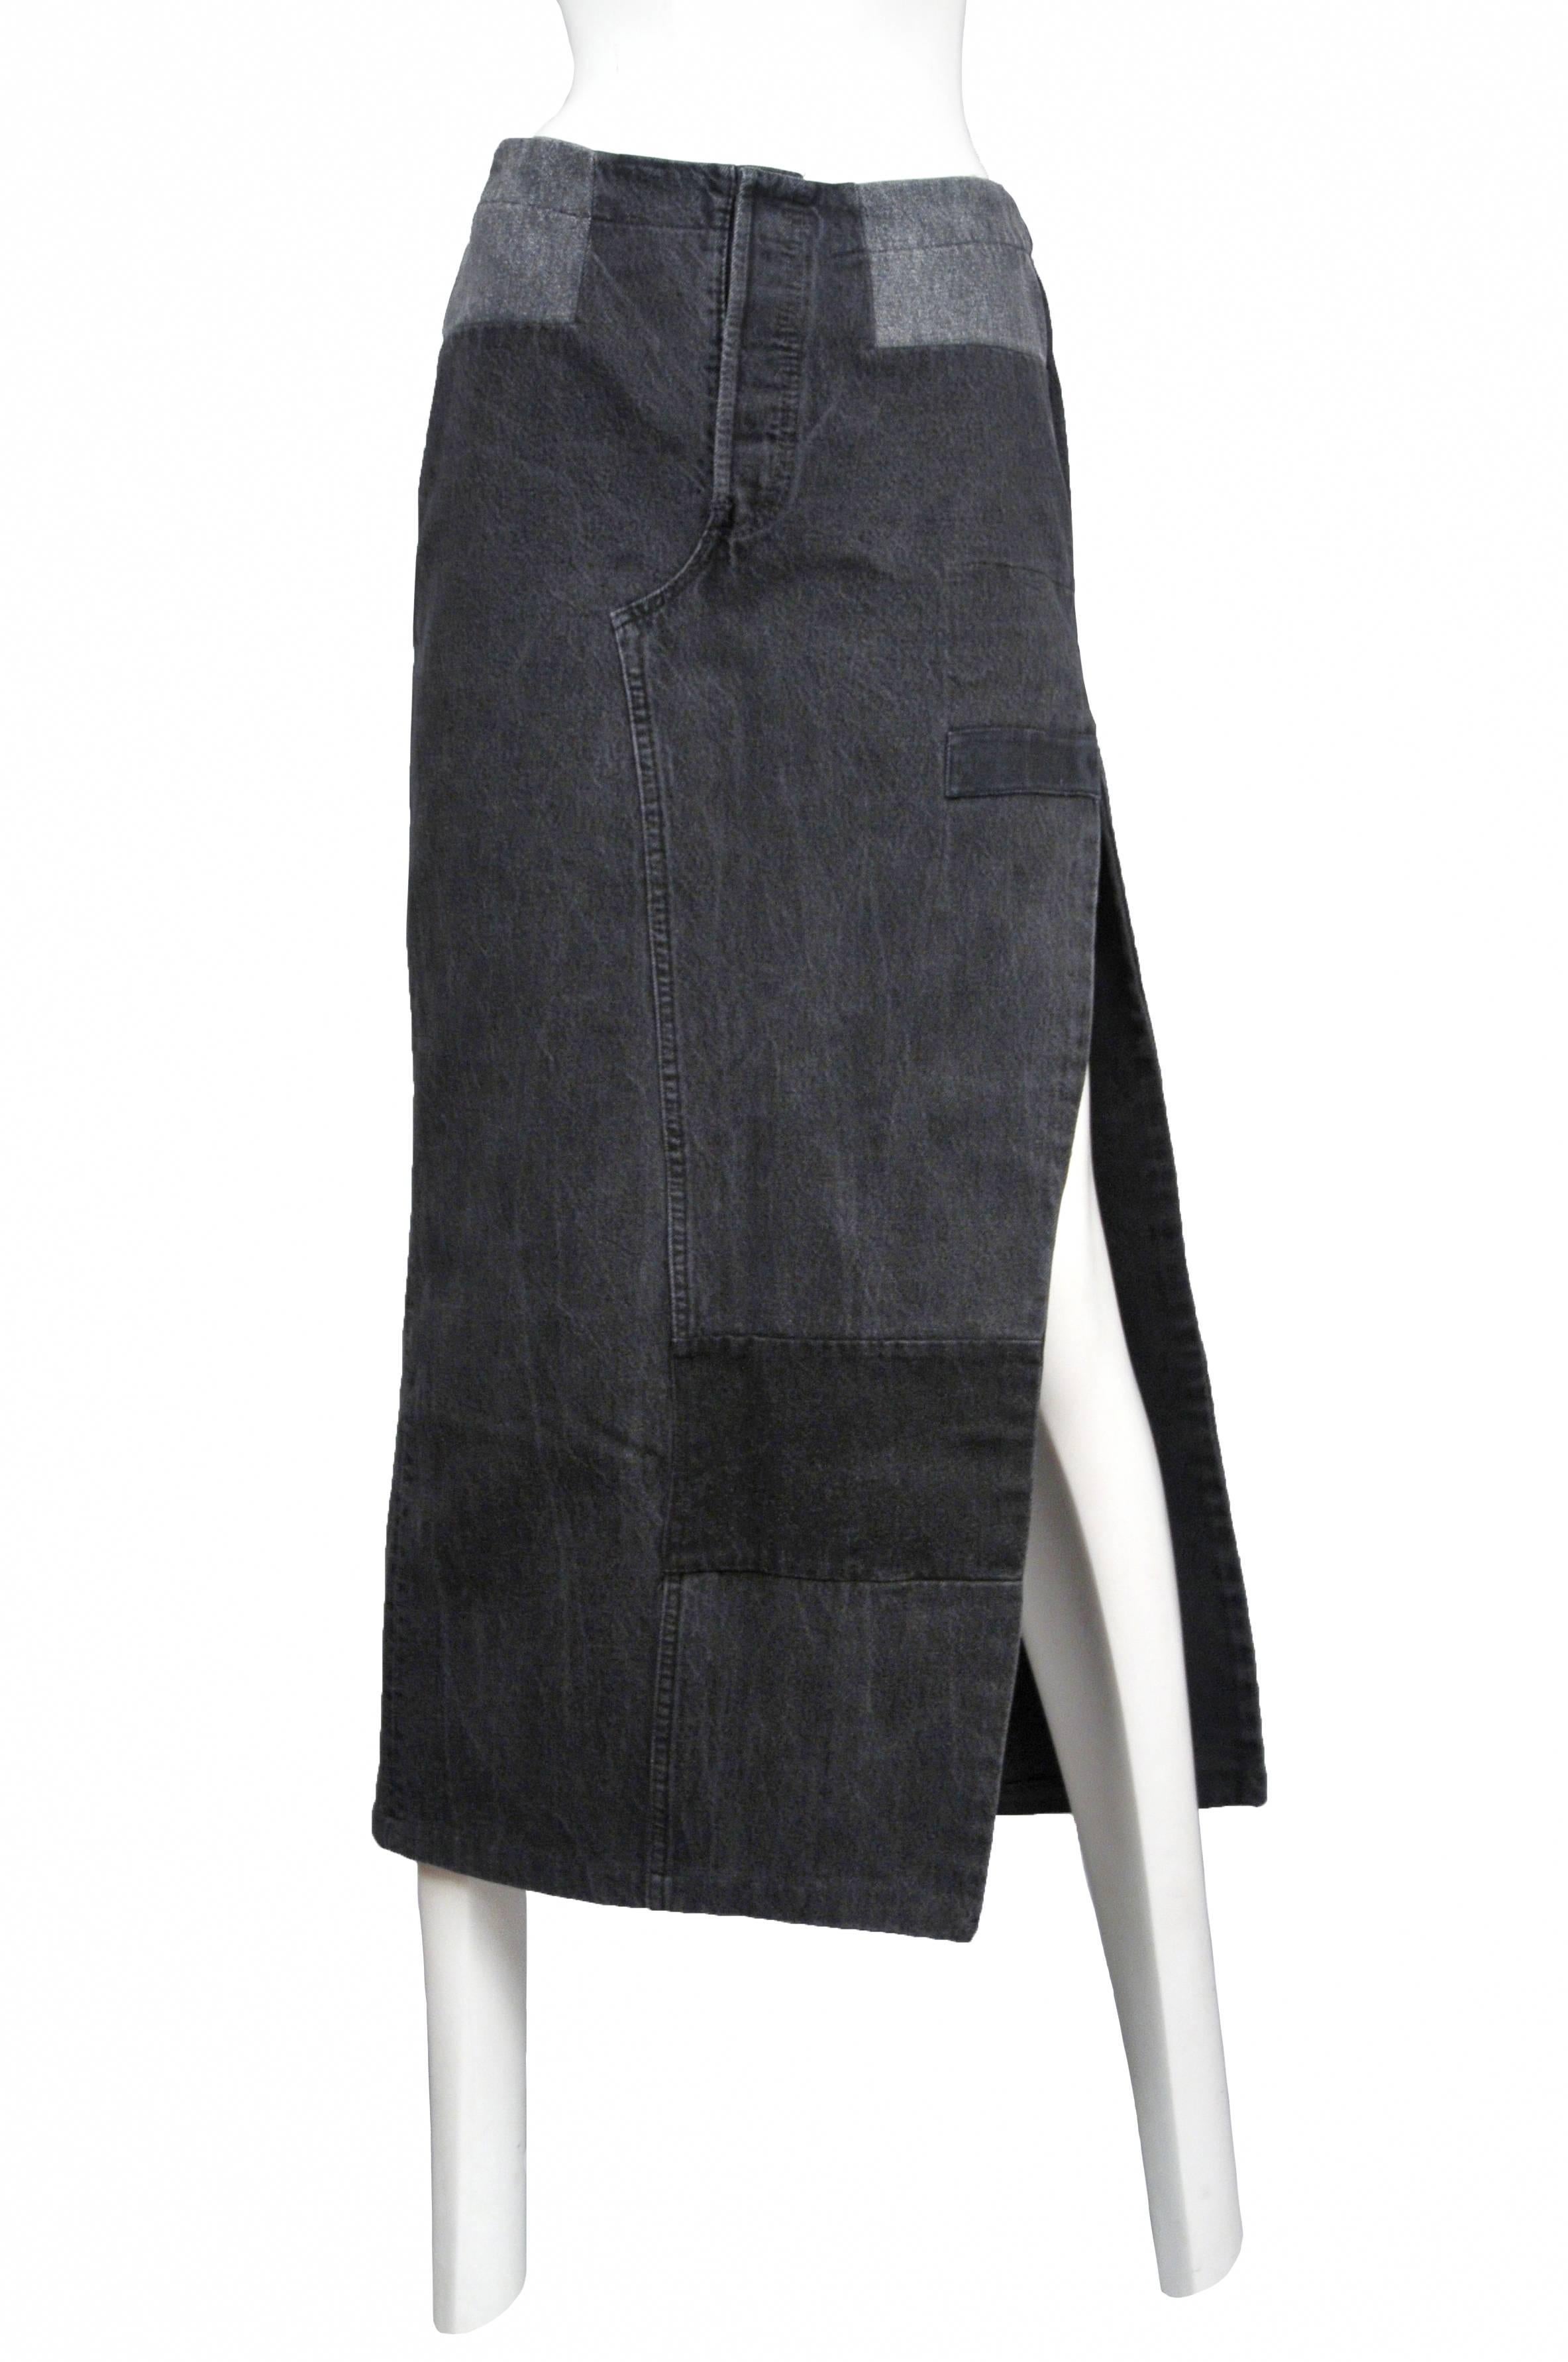 Vintage Martin Margiela artisanal black denim maxi skirt made of reconstructed black jeans and features a slit at the side and inset back waistband. Circa 2002.